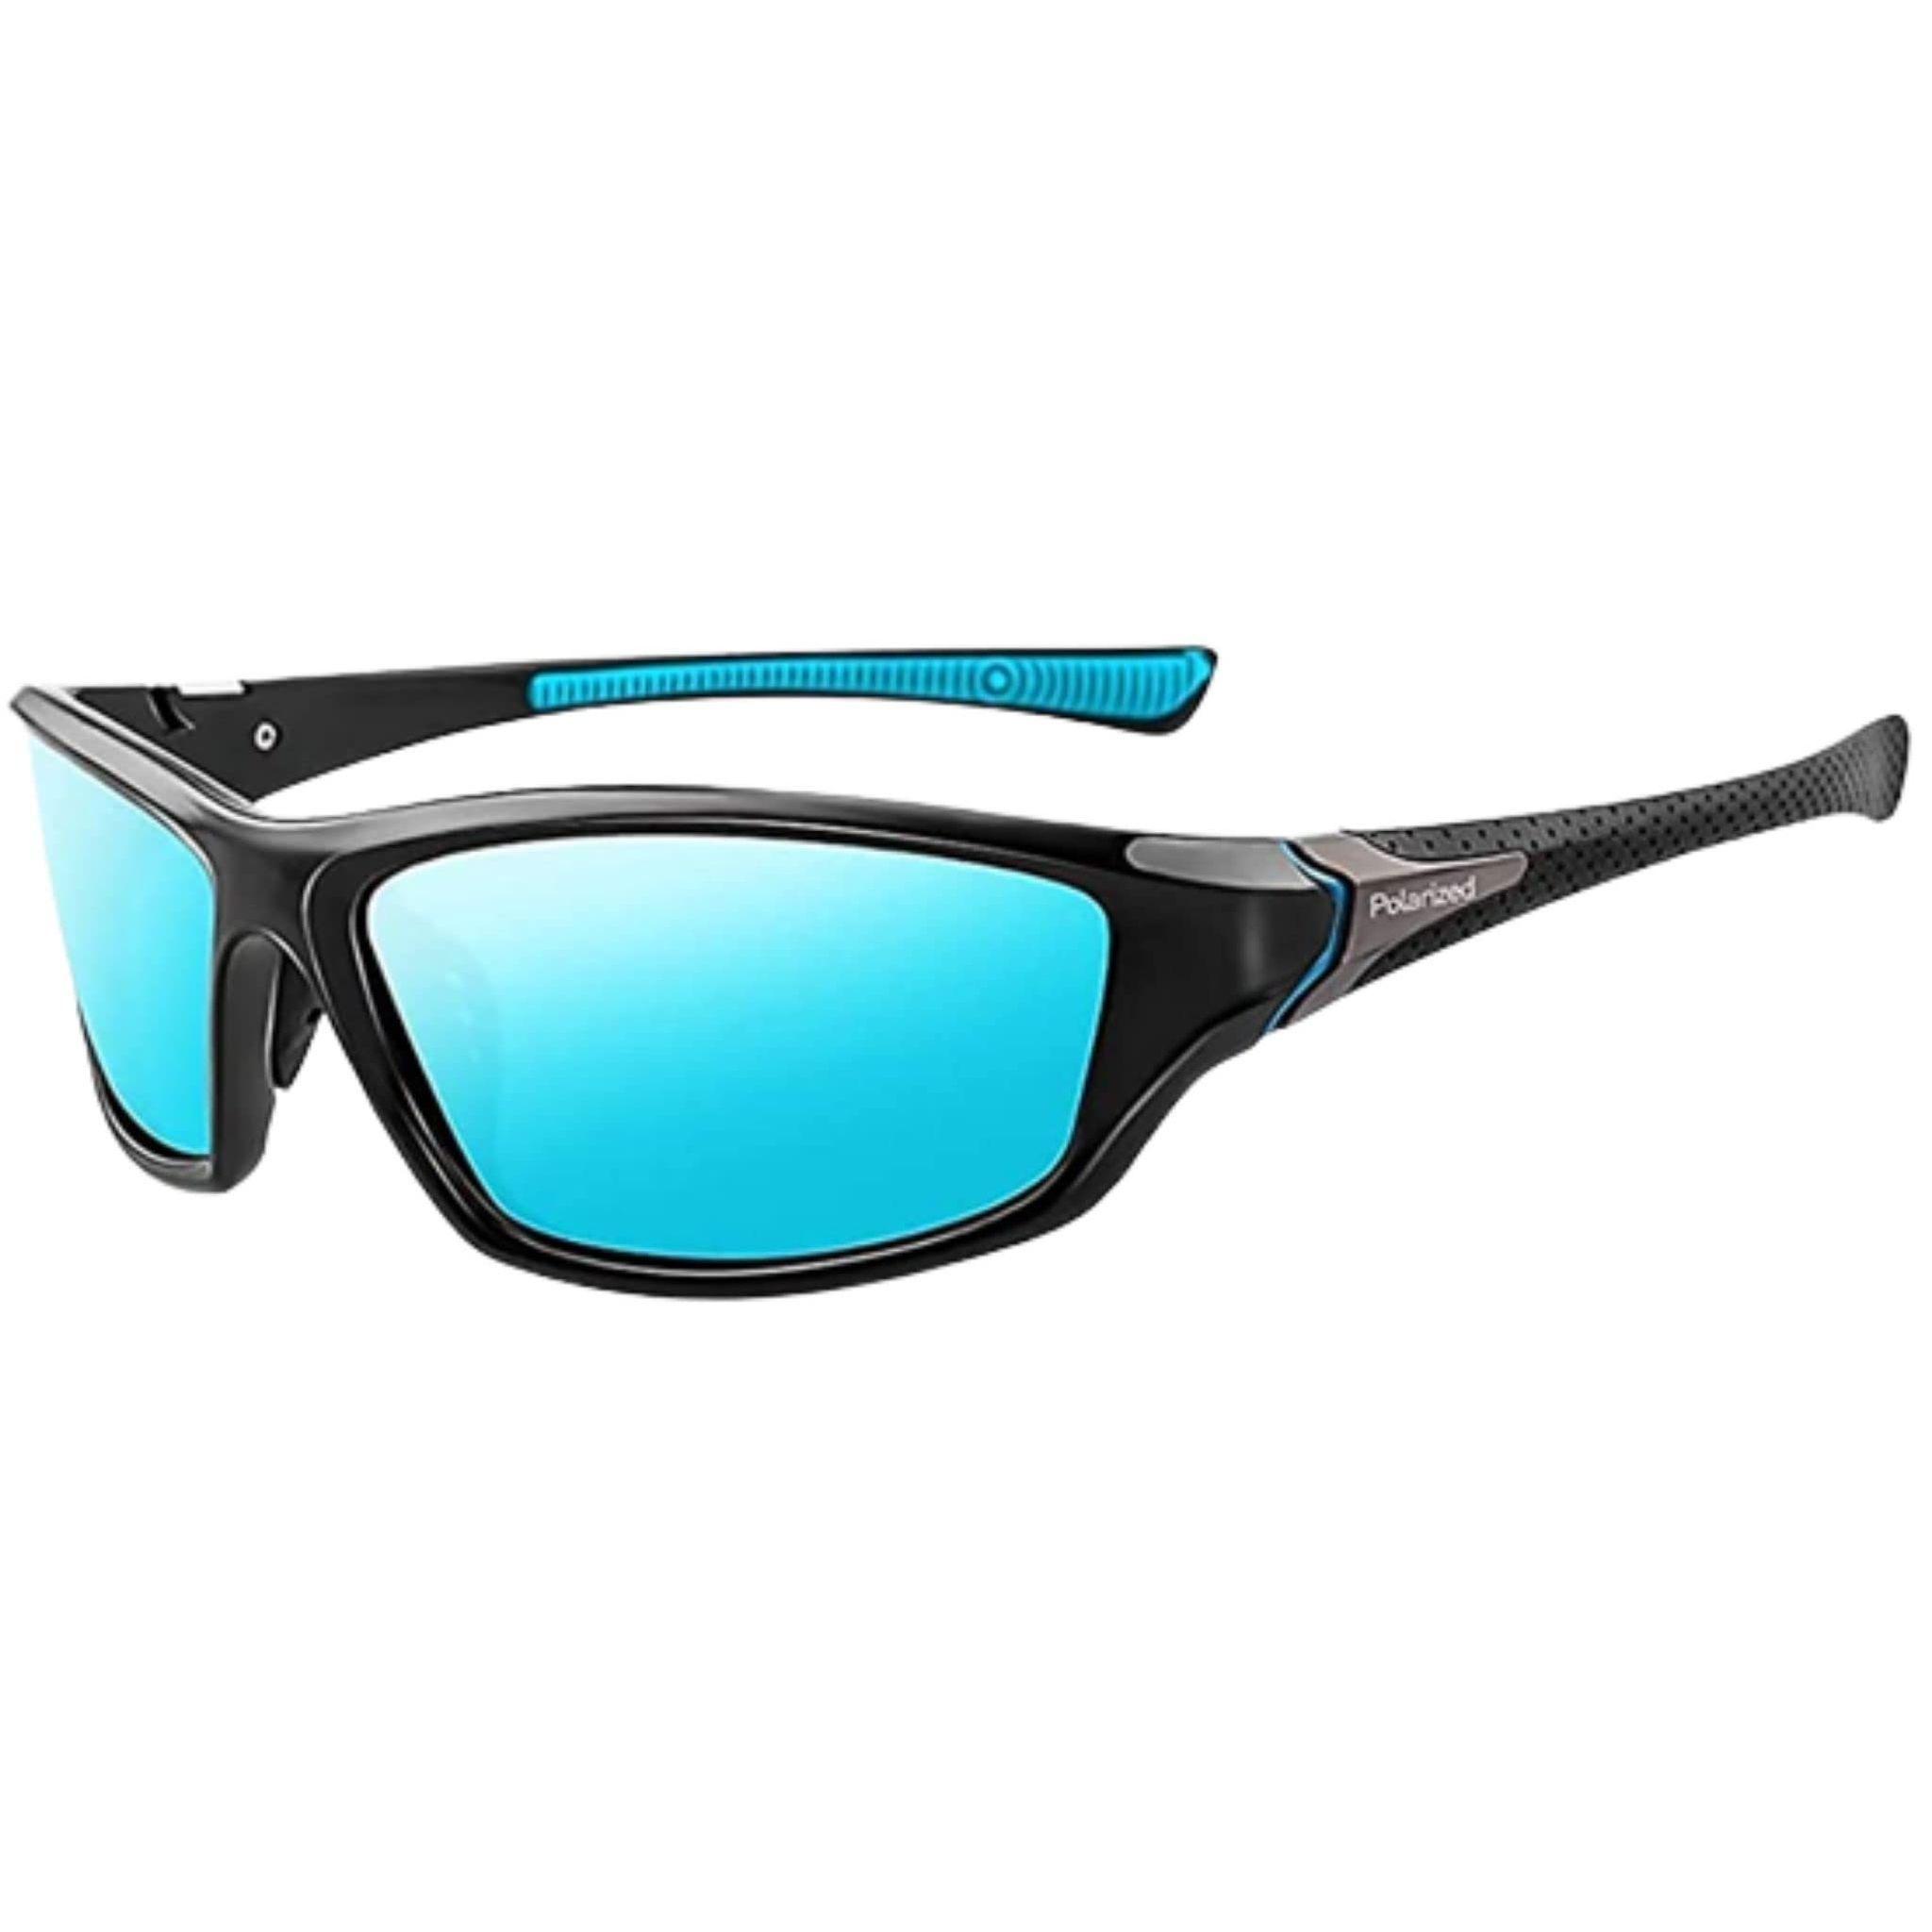 Outdoor Cycling Polarized Sports Sunglasses For Men And Women -FunkyTr –  FunkyTradition